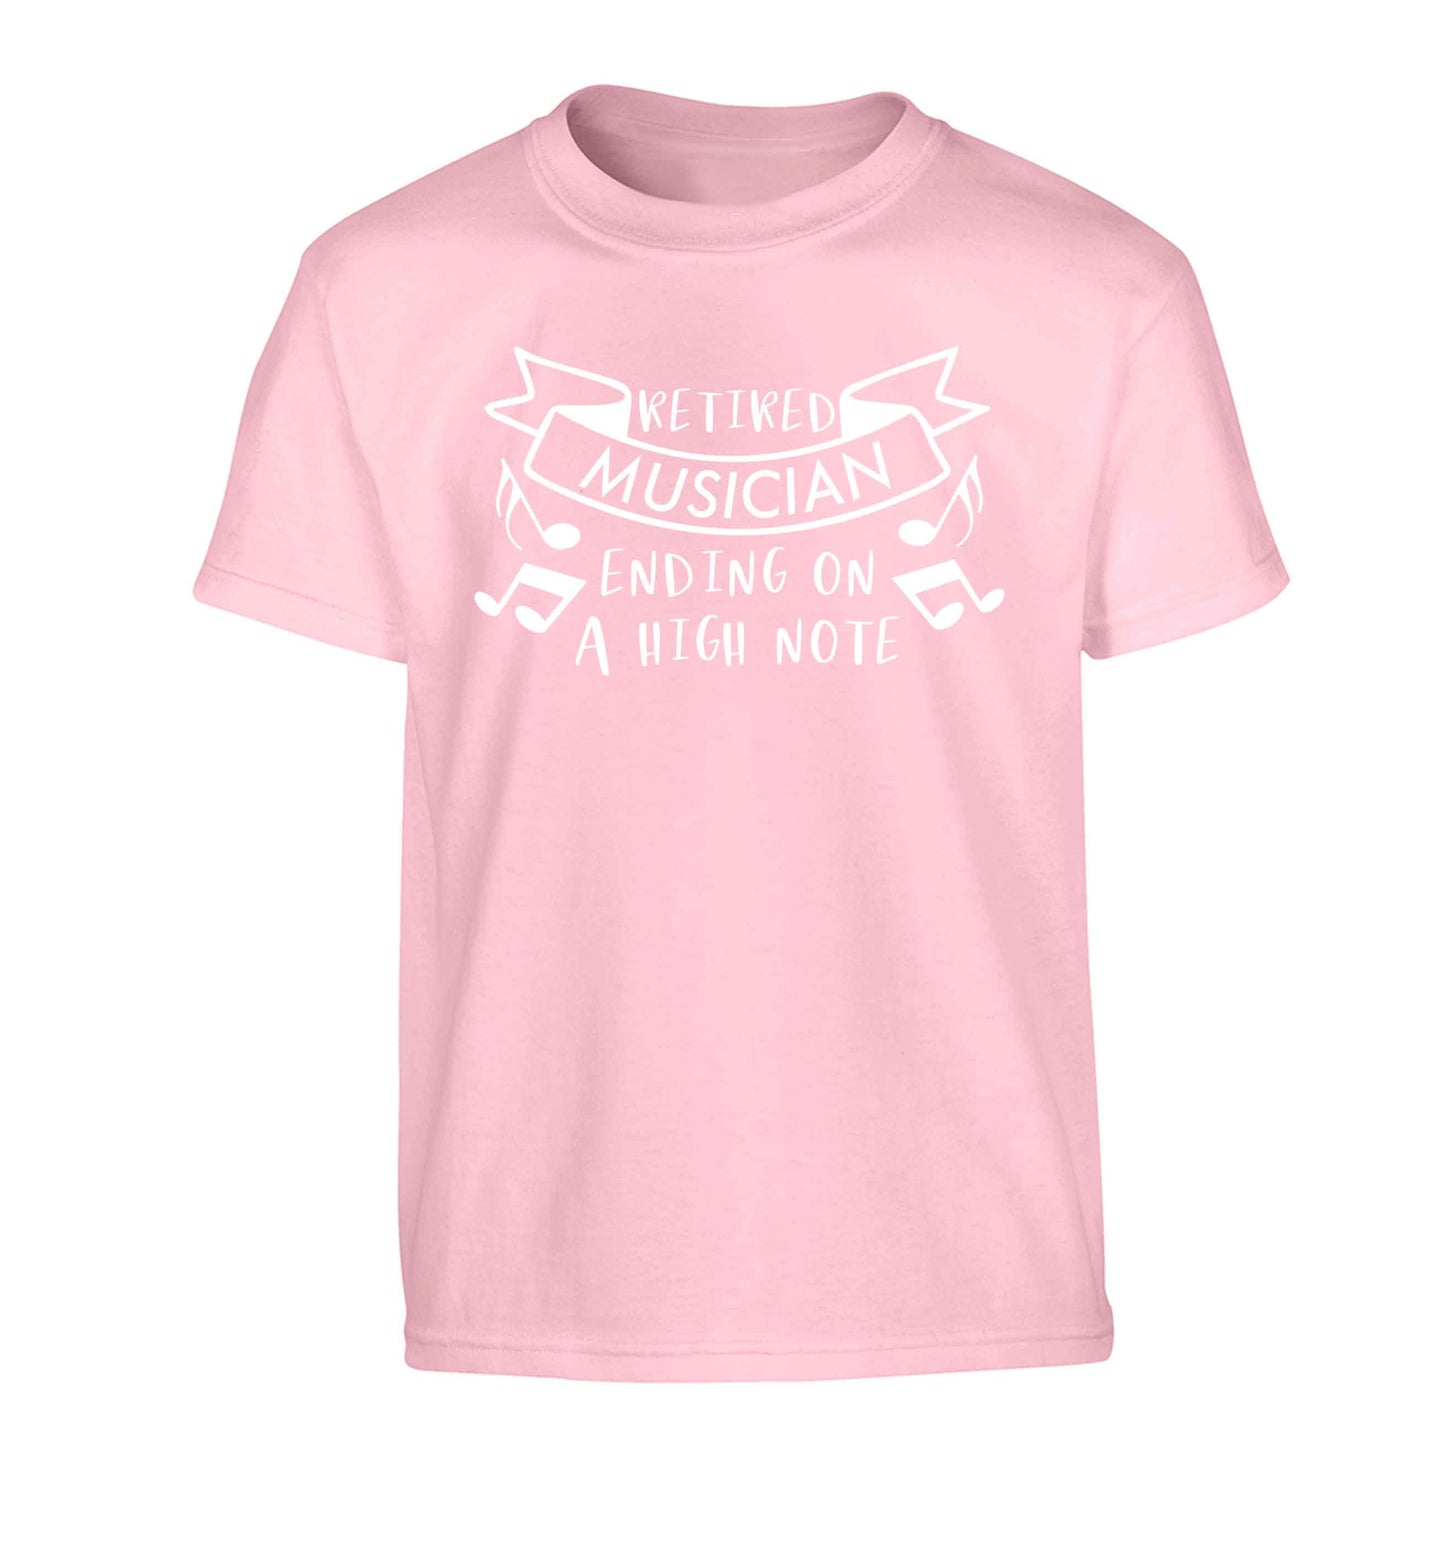 Retired musician ending on a high note Children's light pink Tshirt 12-13 Years